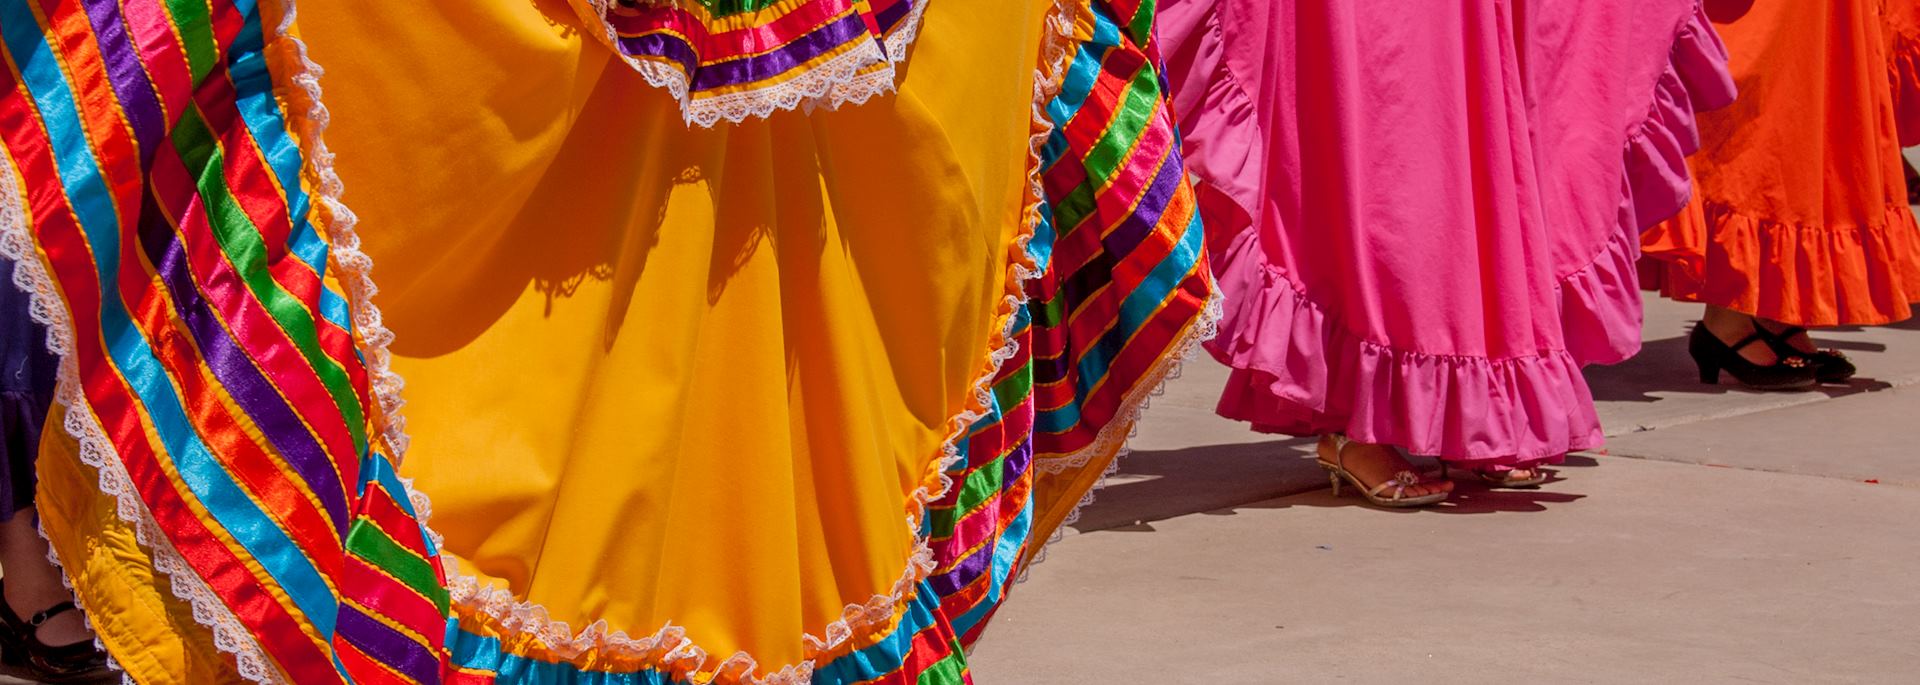 Local dancers in Mexico